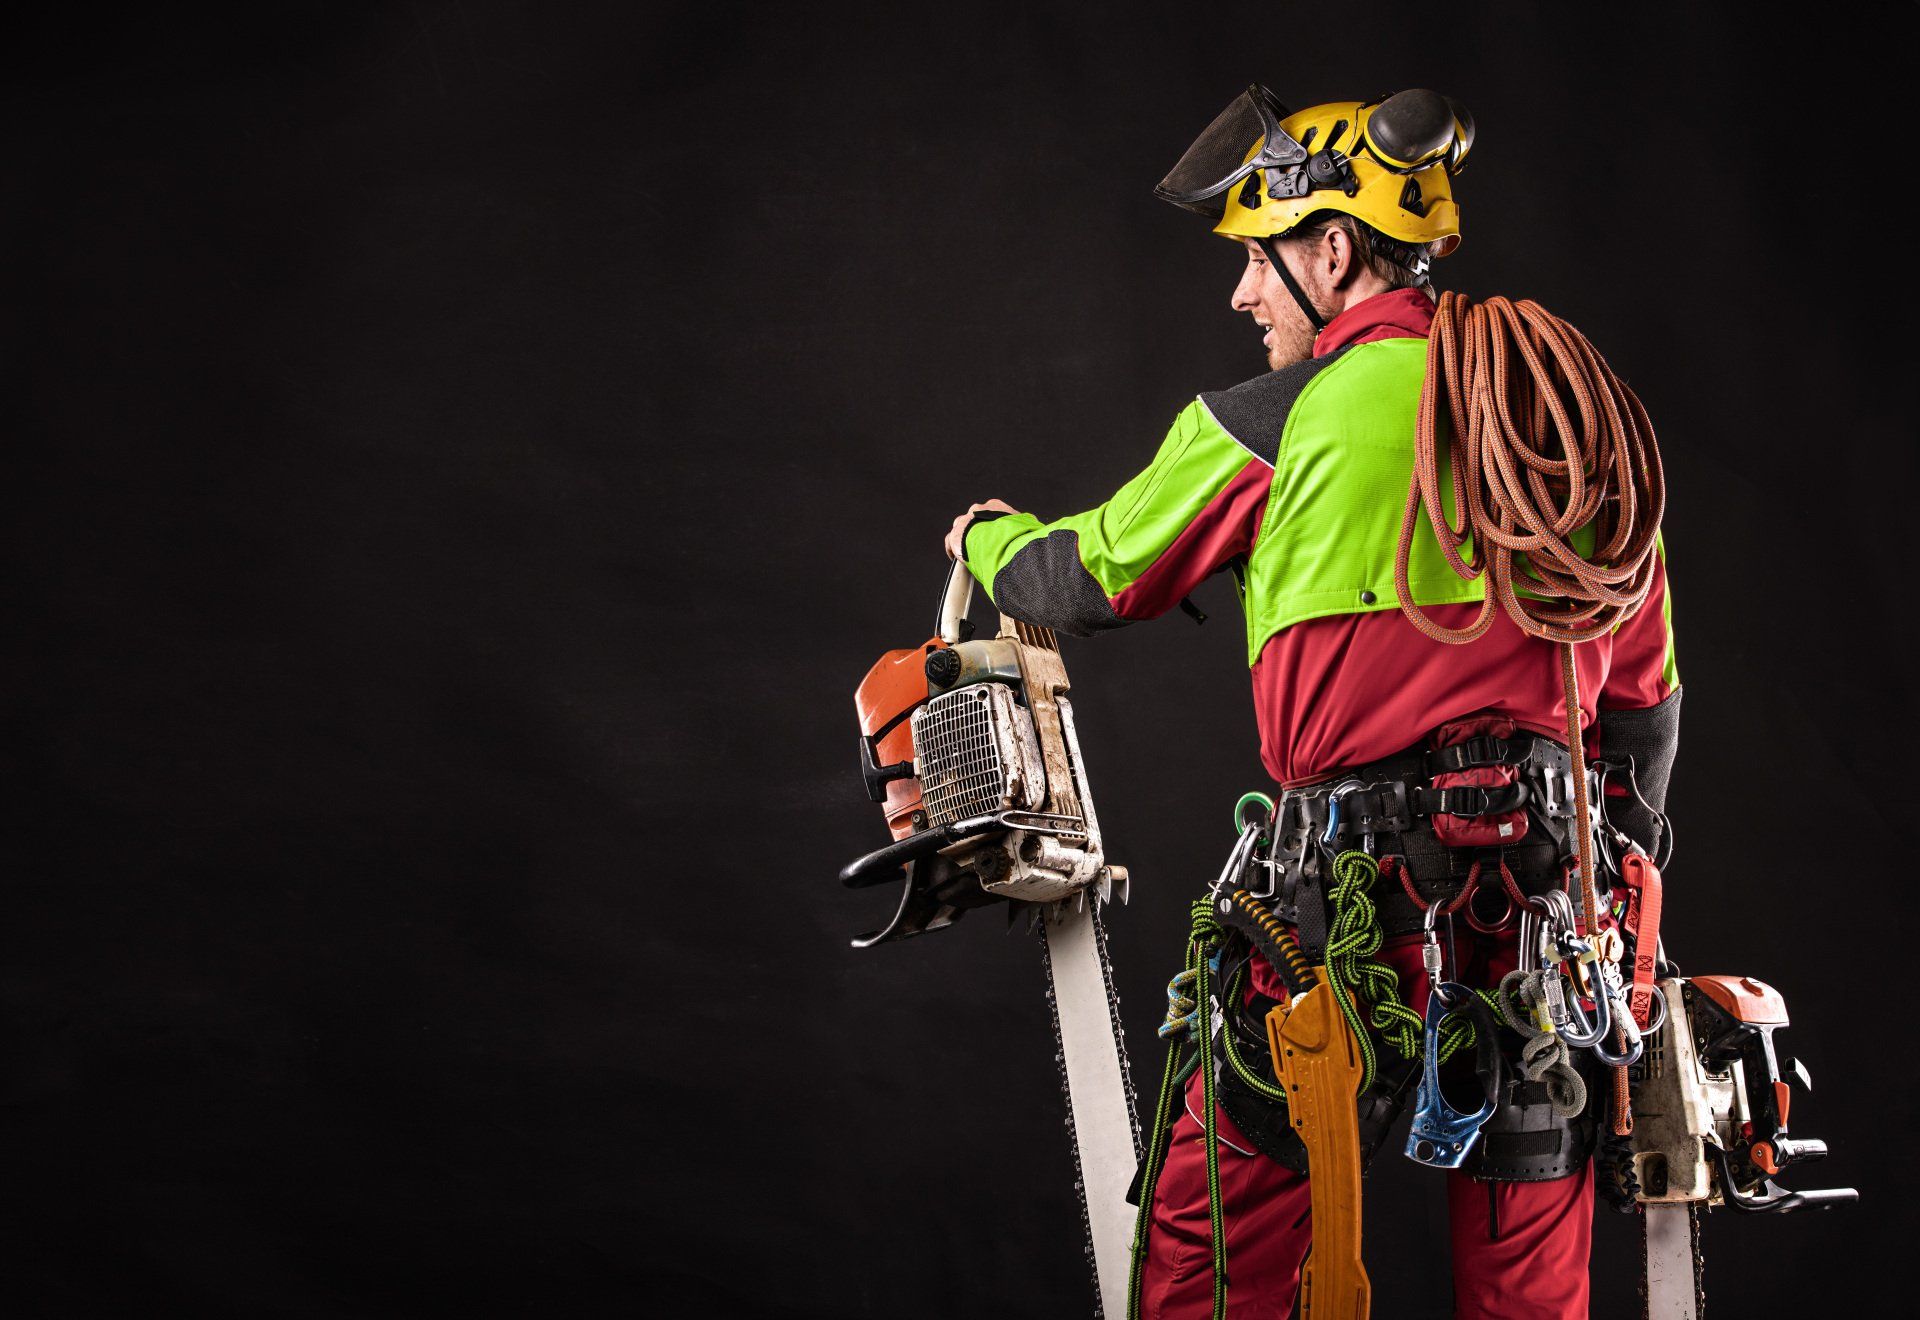 Image depicts a male tree arborist standing with his back to the audience, fully decked out with all his gear. Ropes, harness, helmet, chainsaw and more.